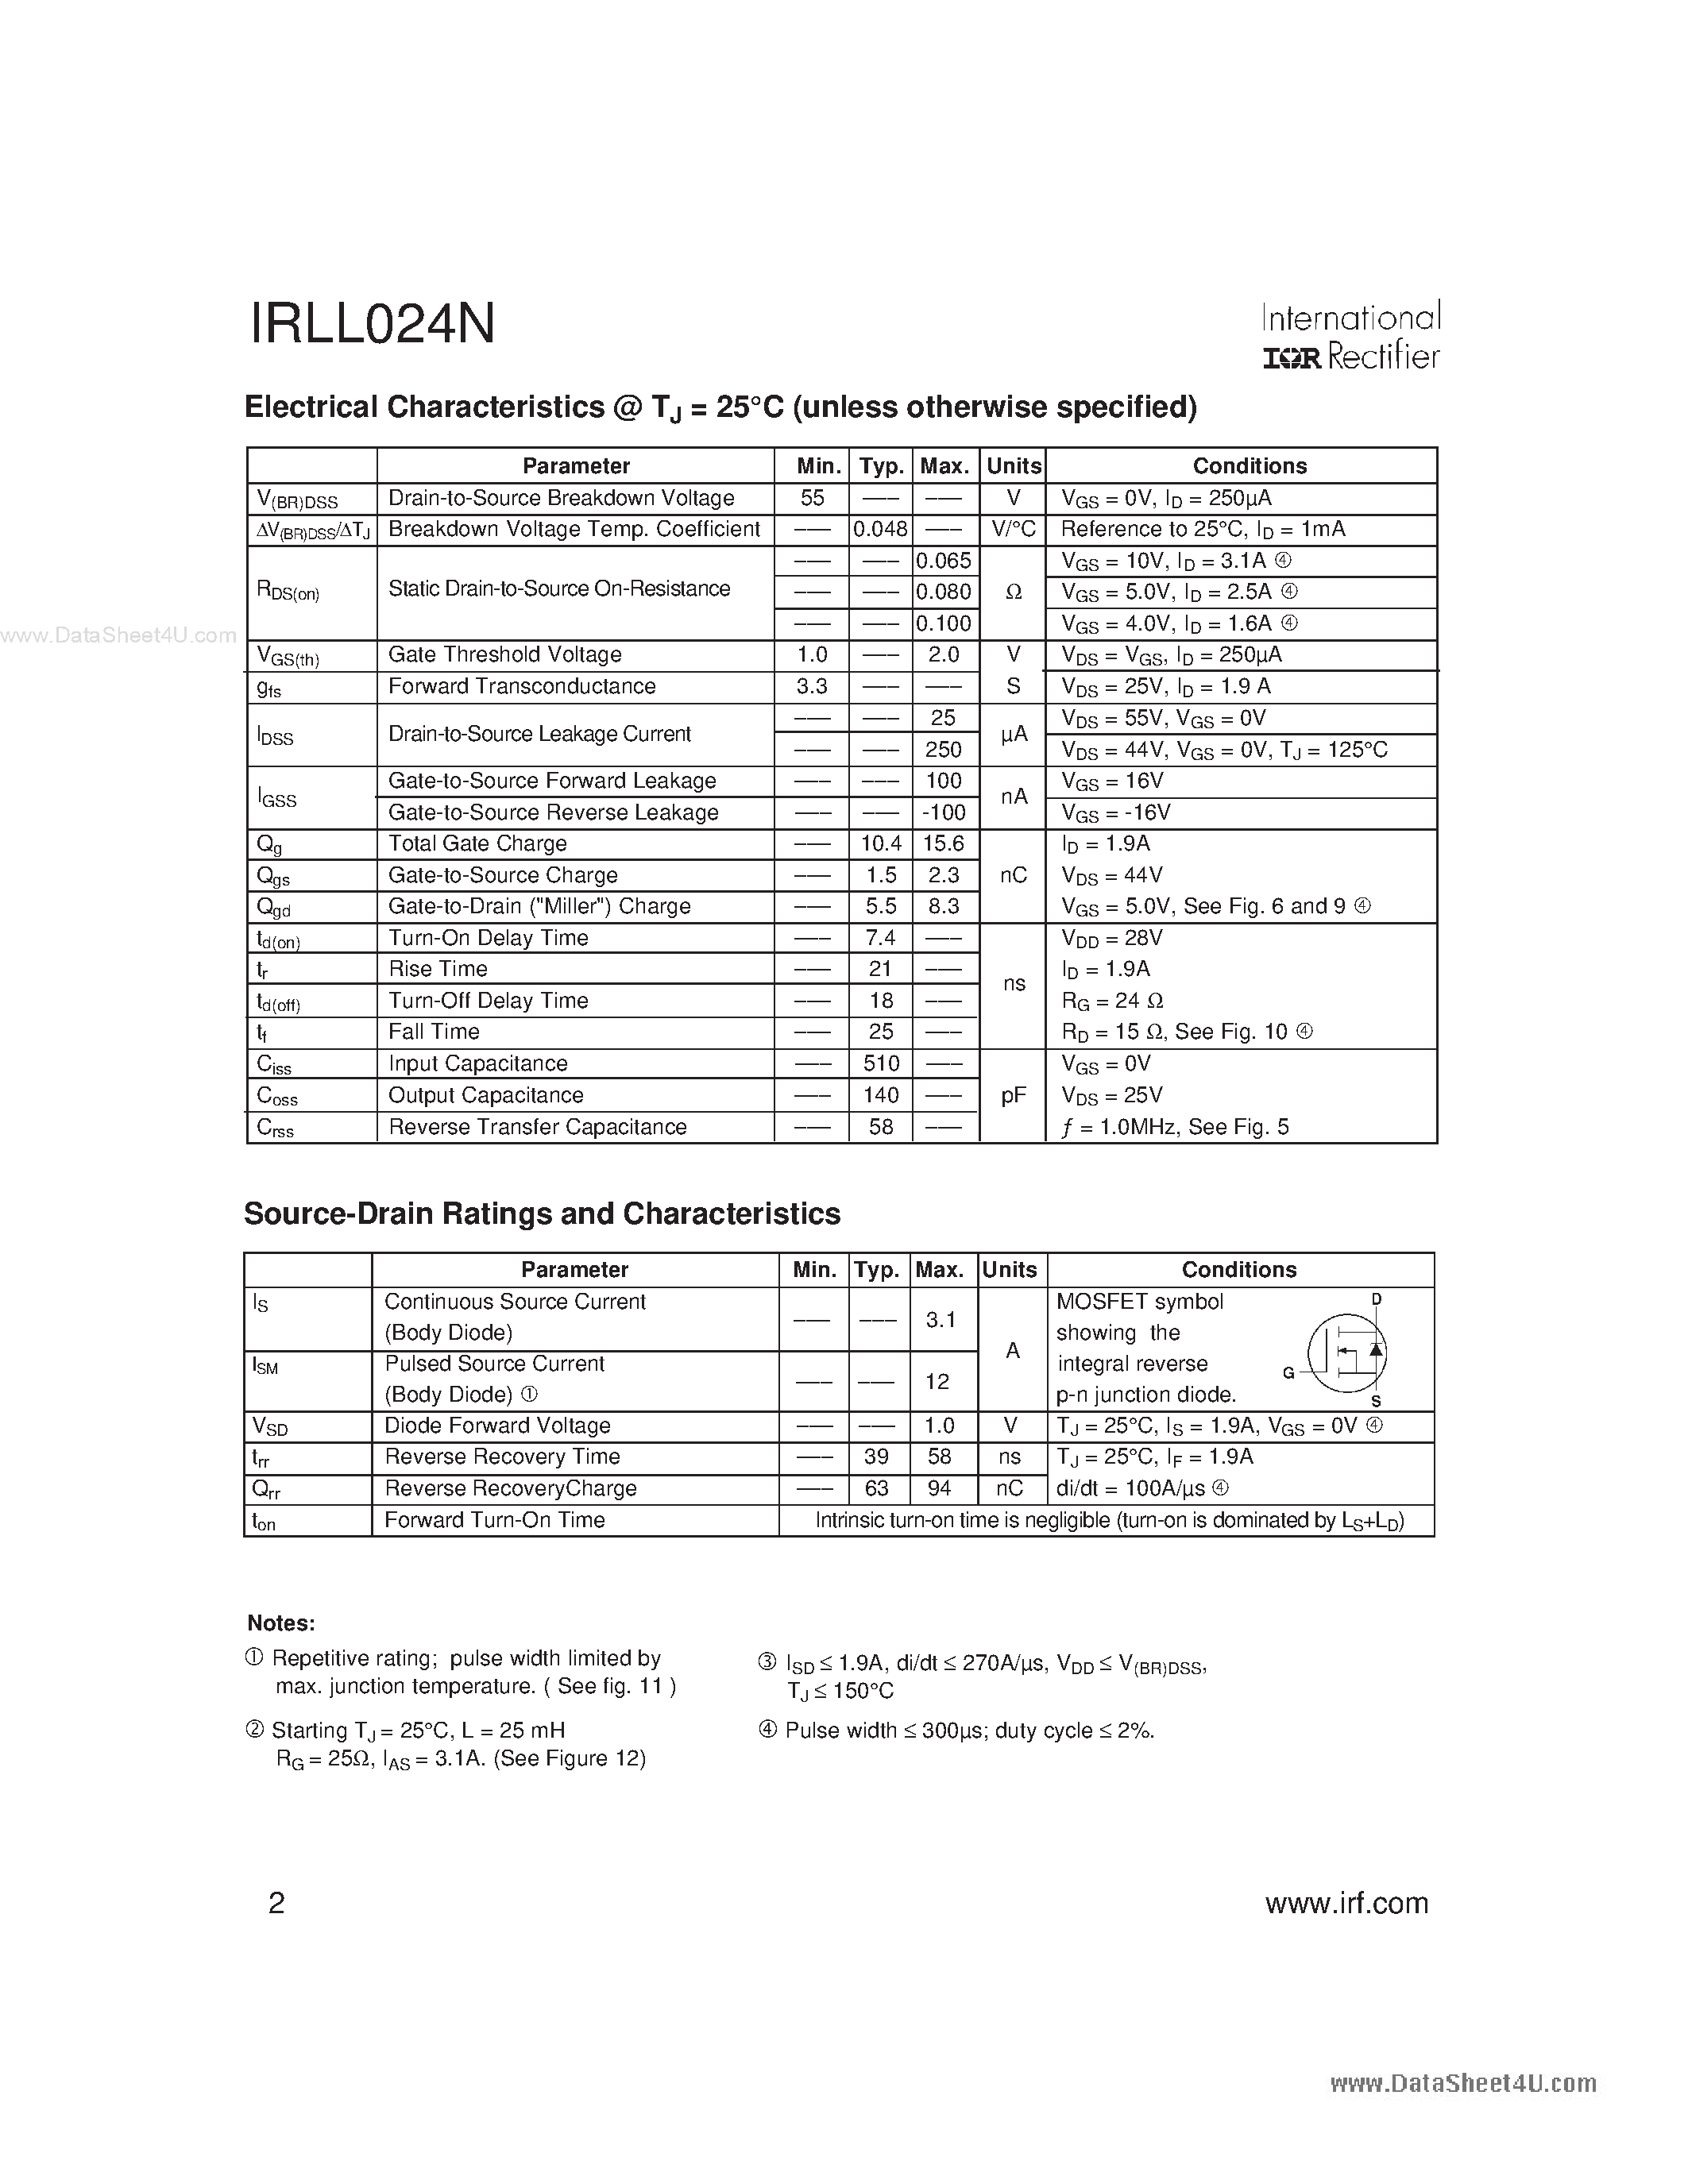 Datasheet LL024N - Search -----> IRLL024N page 2